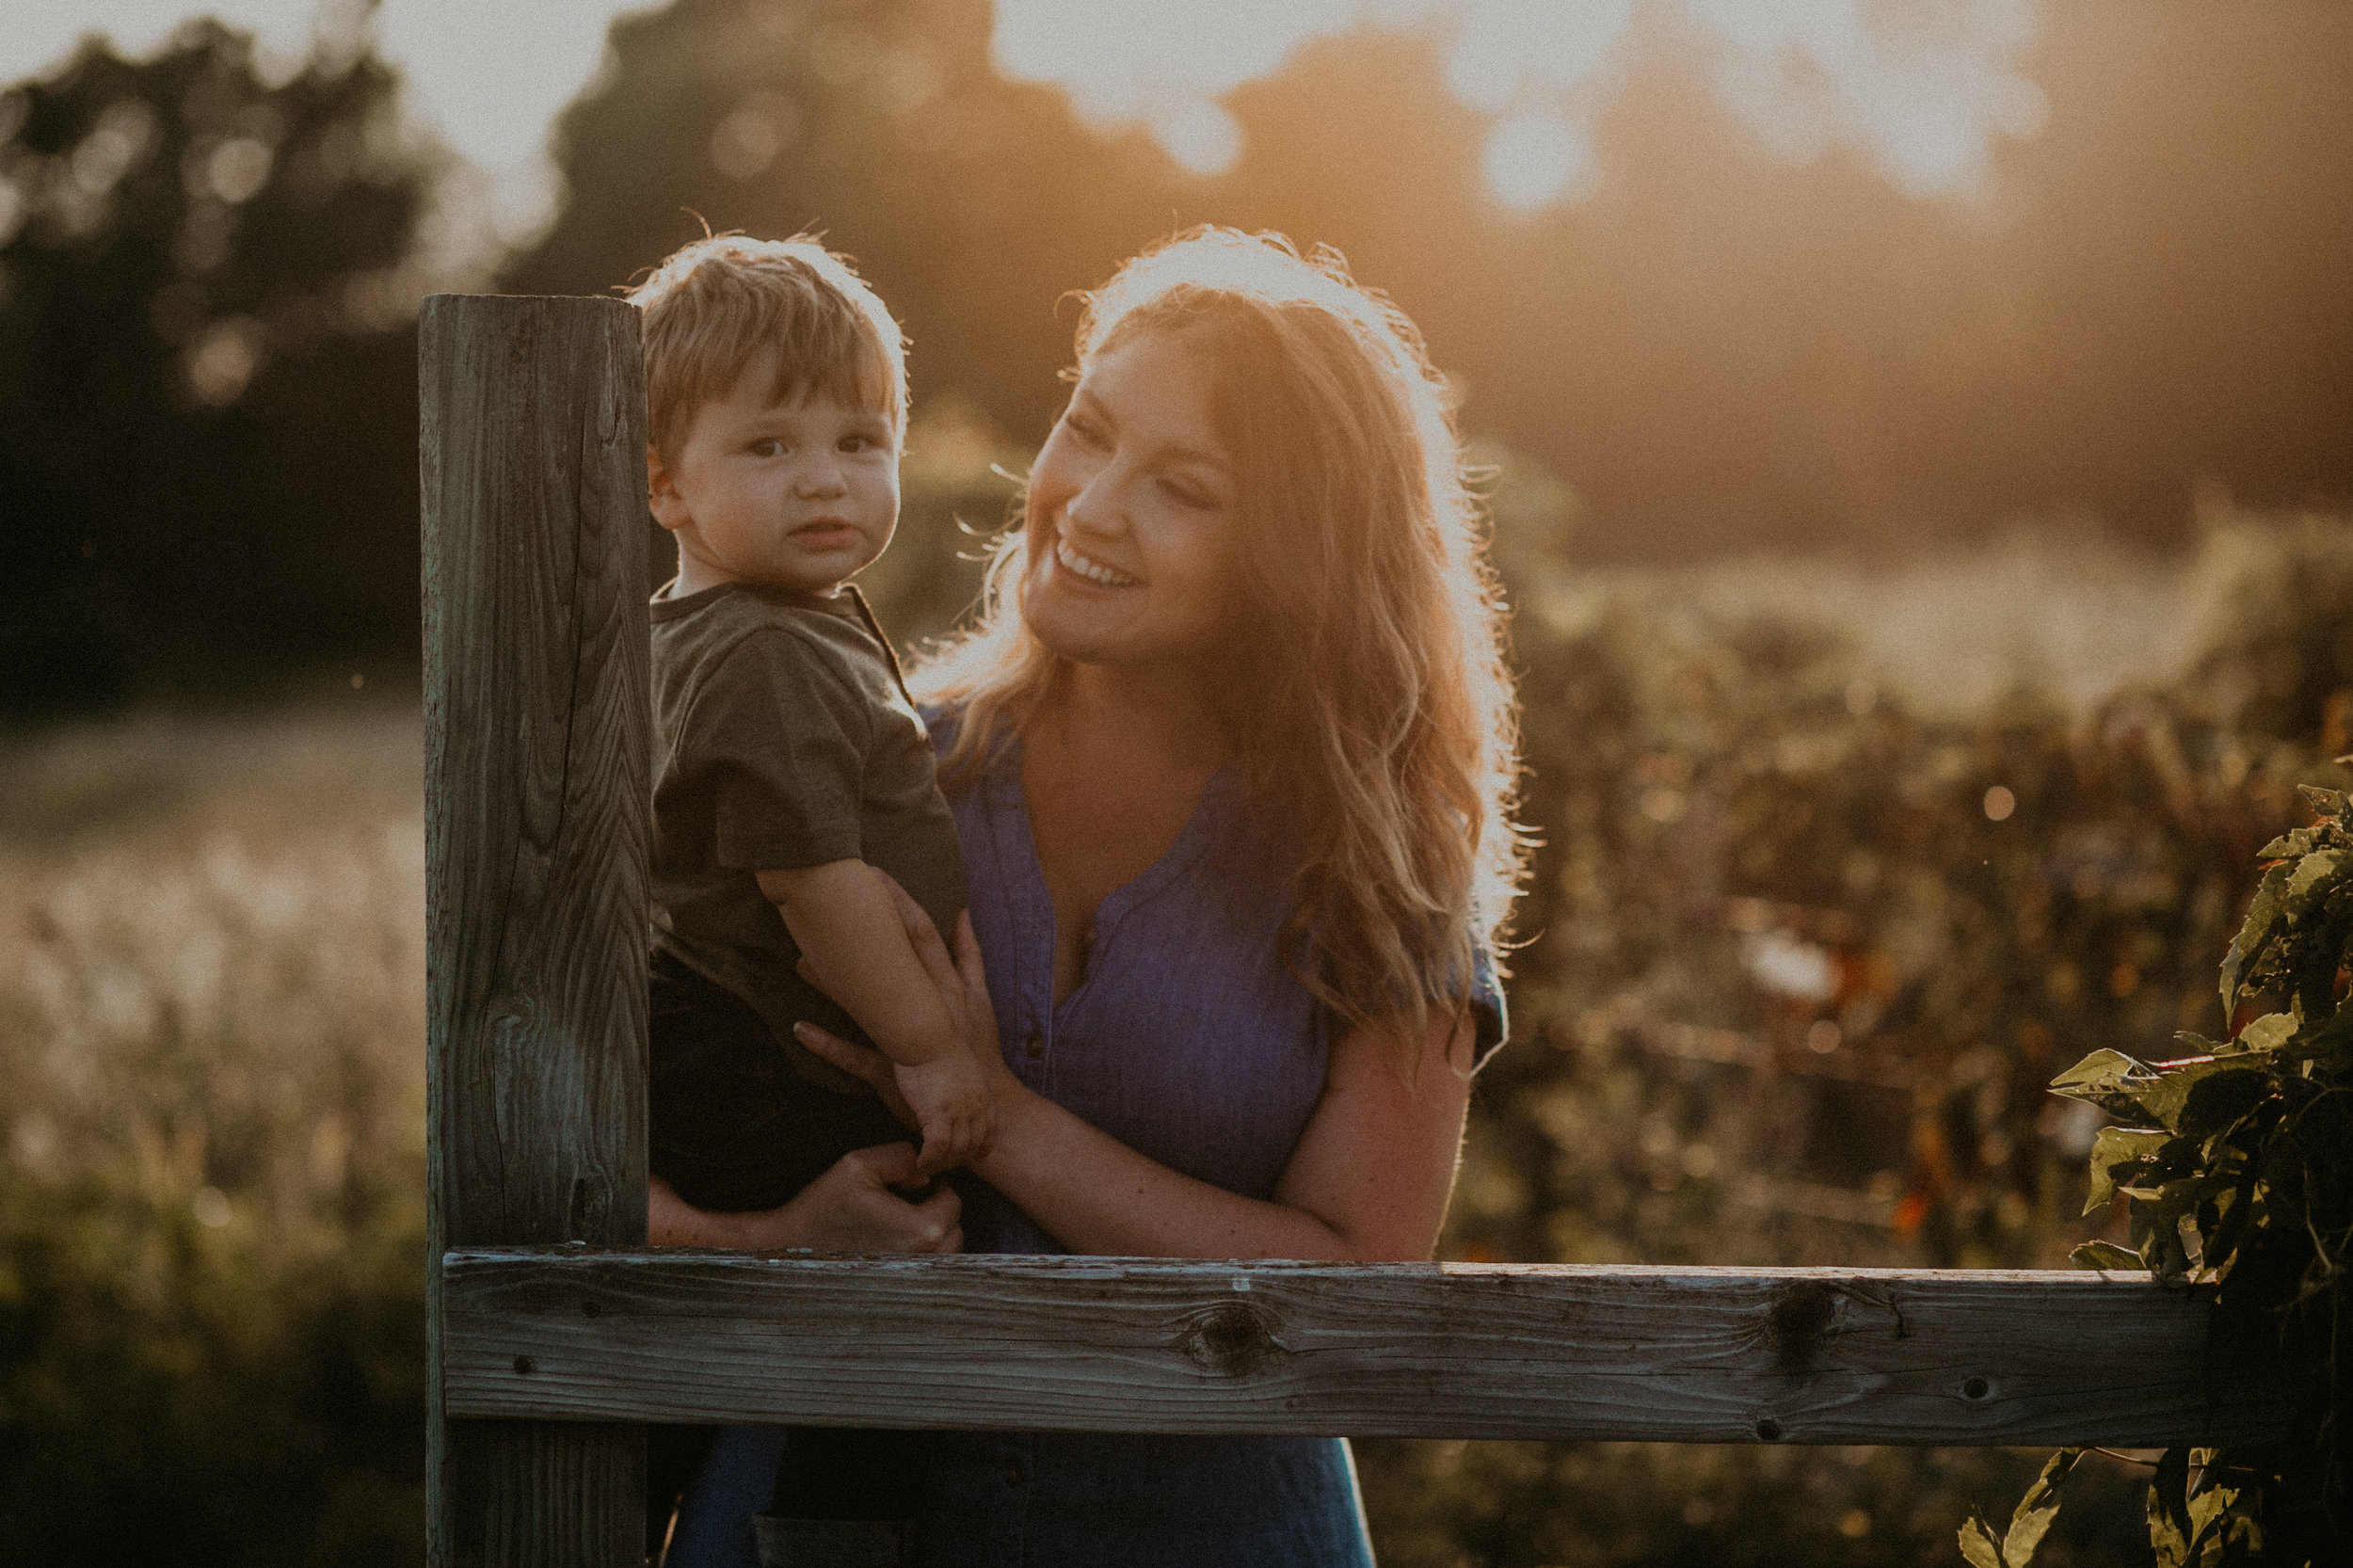  River Falls WI lifestyle family photographer sunset 